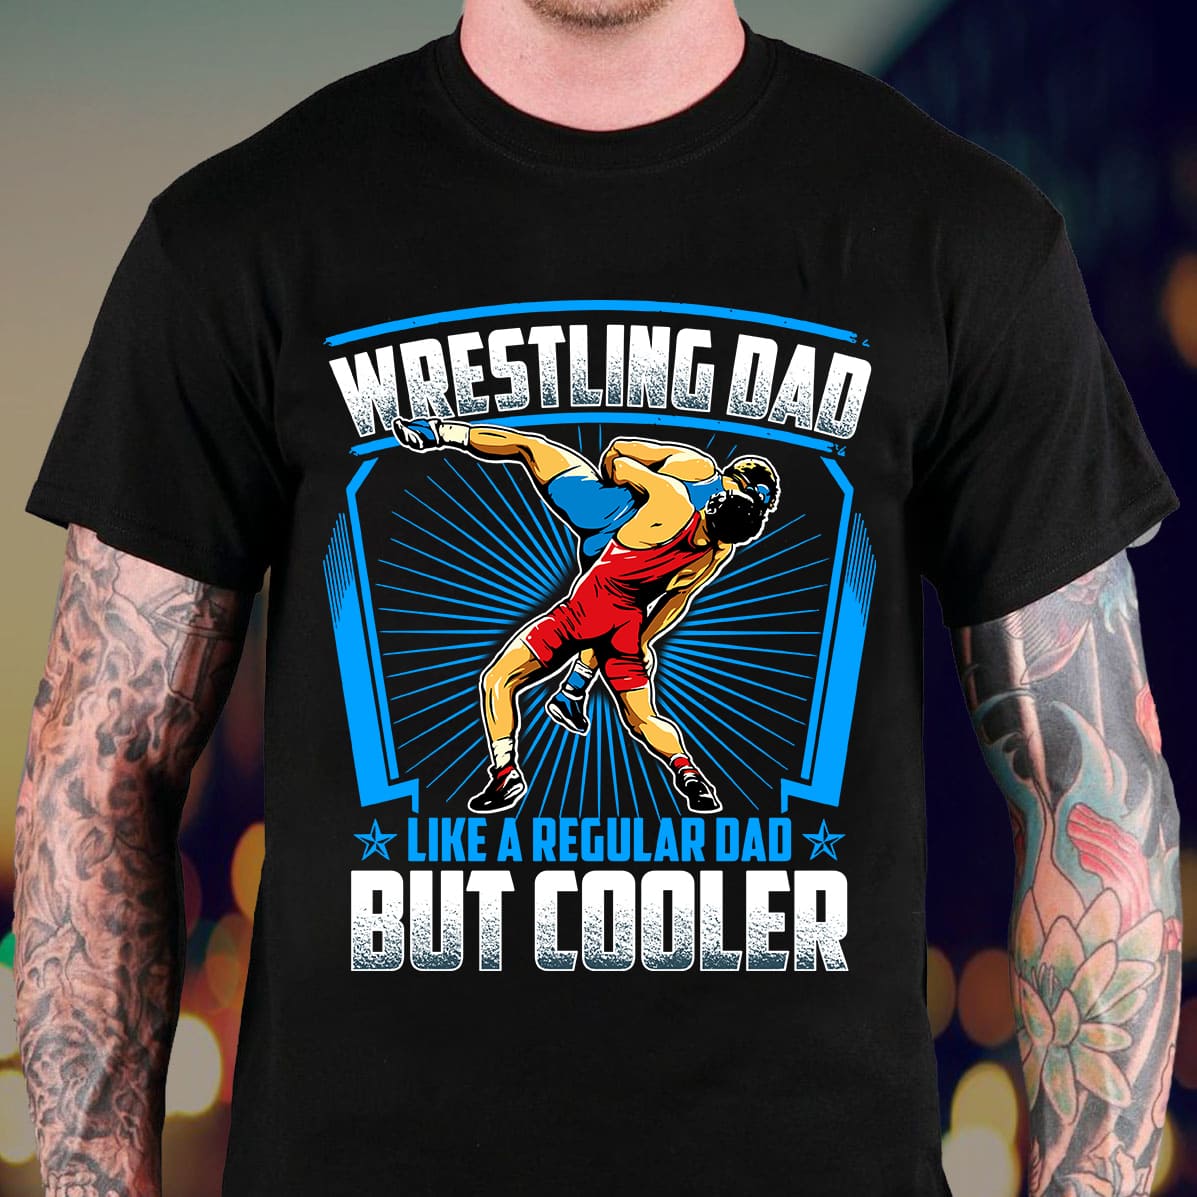 Wrestling dad like a regular dad but cooler - Gift for father's day, wrestling training